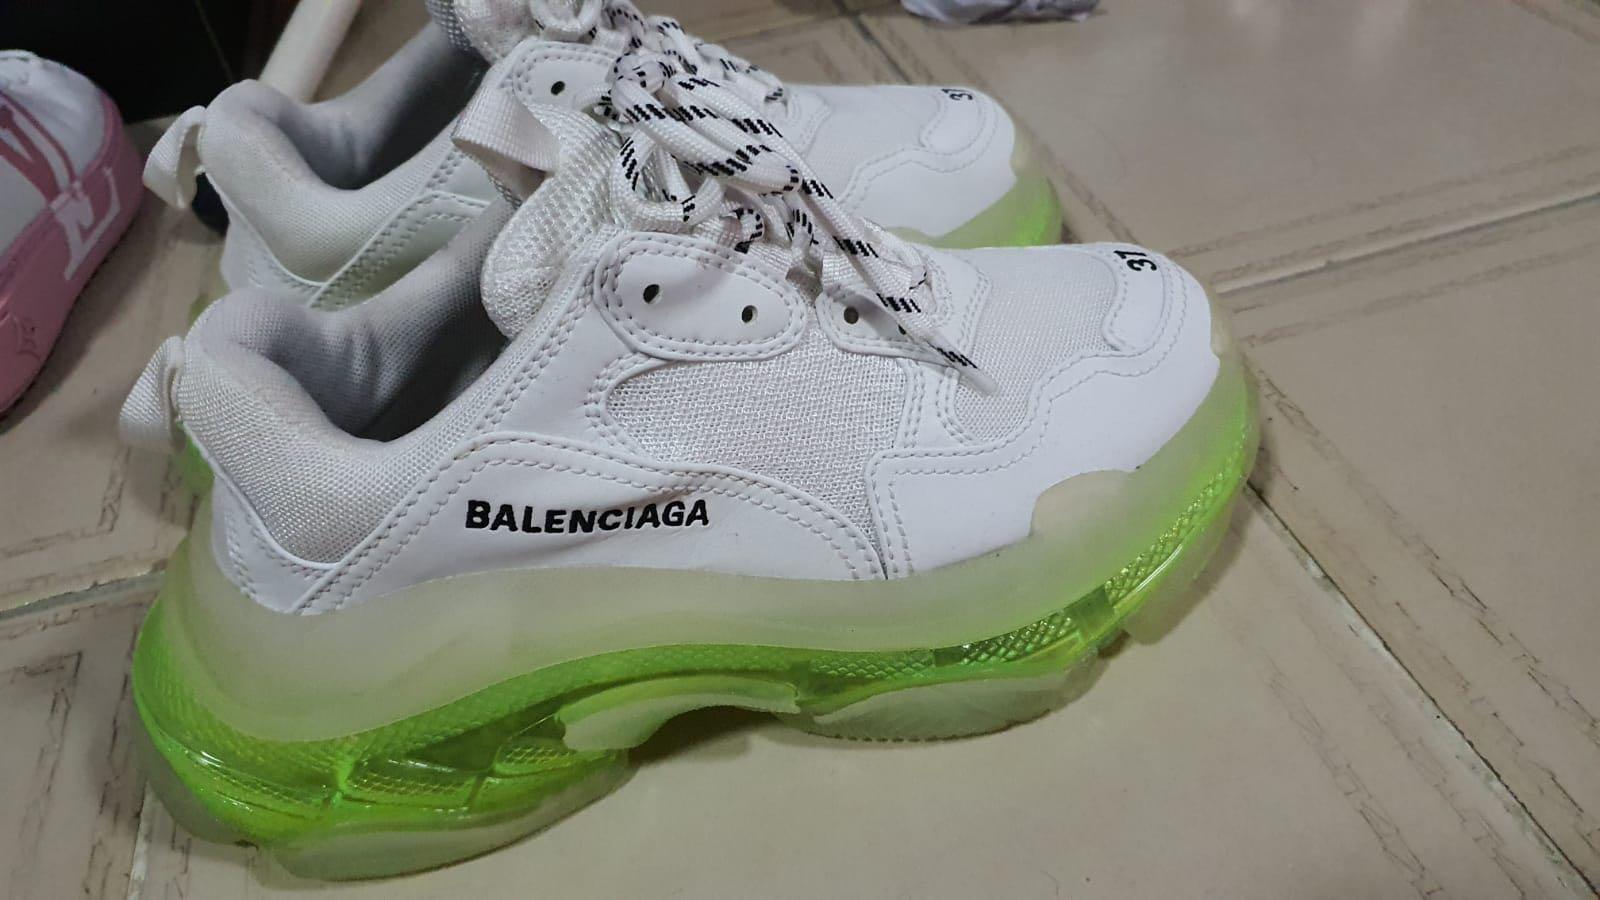 Balenciaga just dropped these for 1850   rSneakers